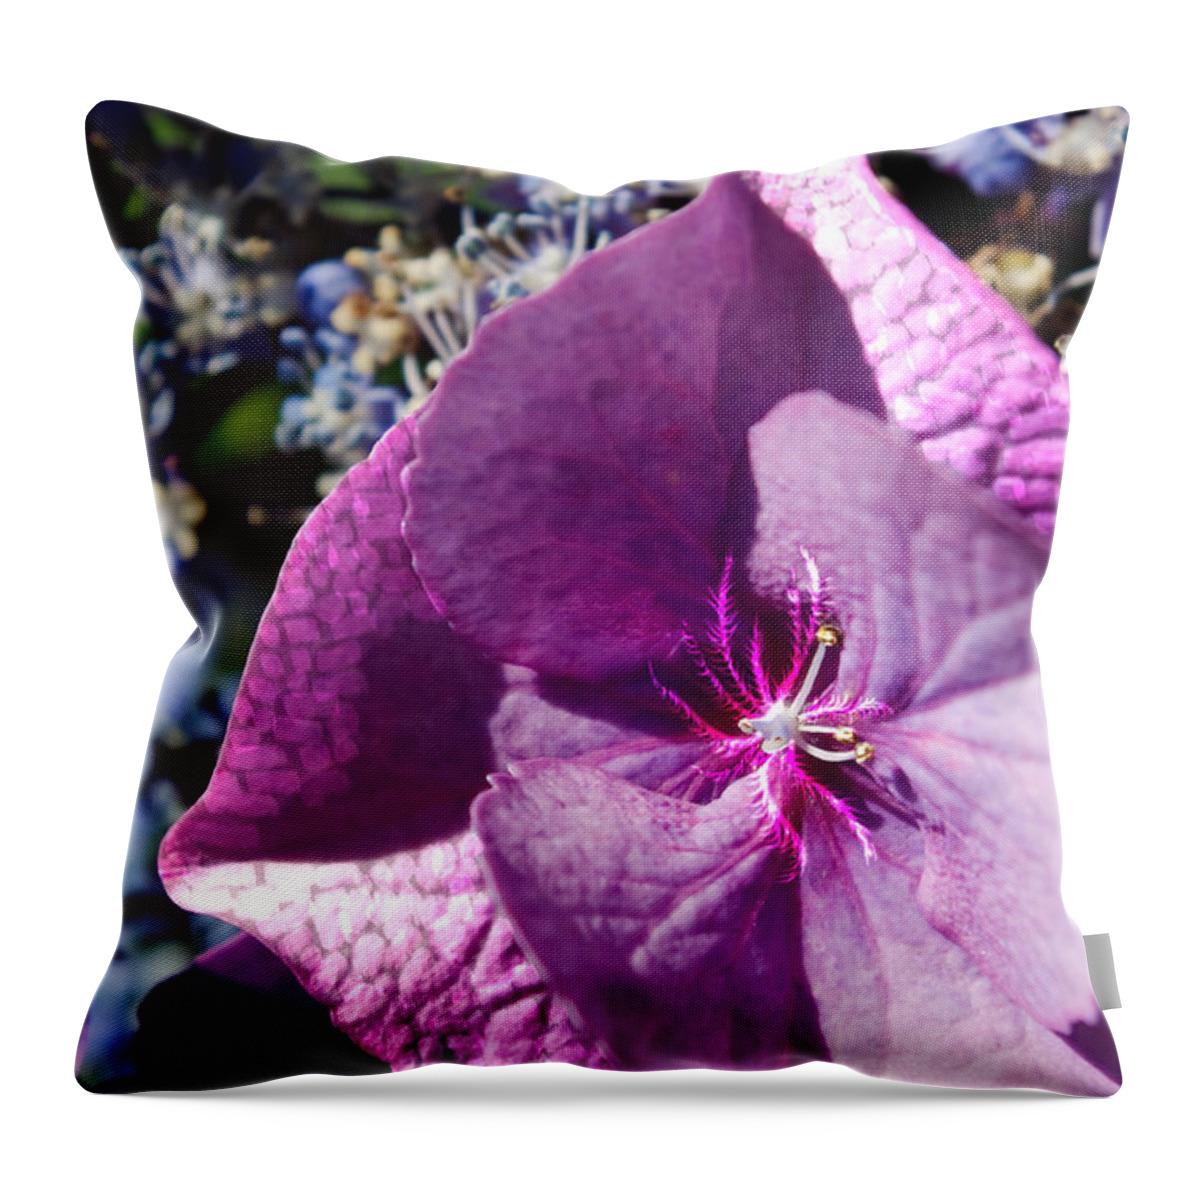 Adria Trail Throw Pillow featuring the photograph Pinker Petals by Adria Trail